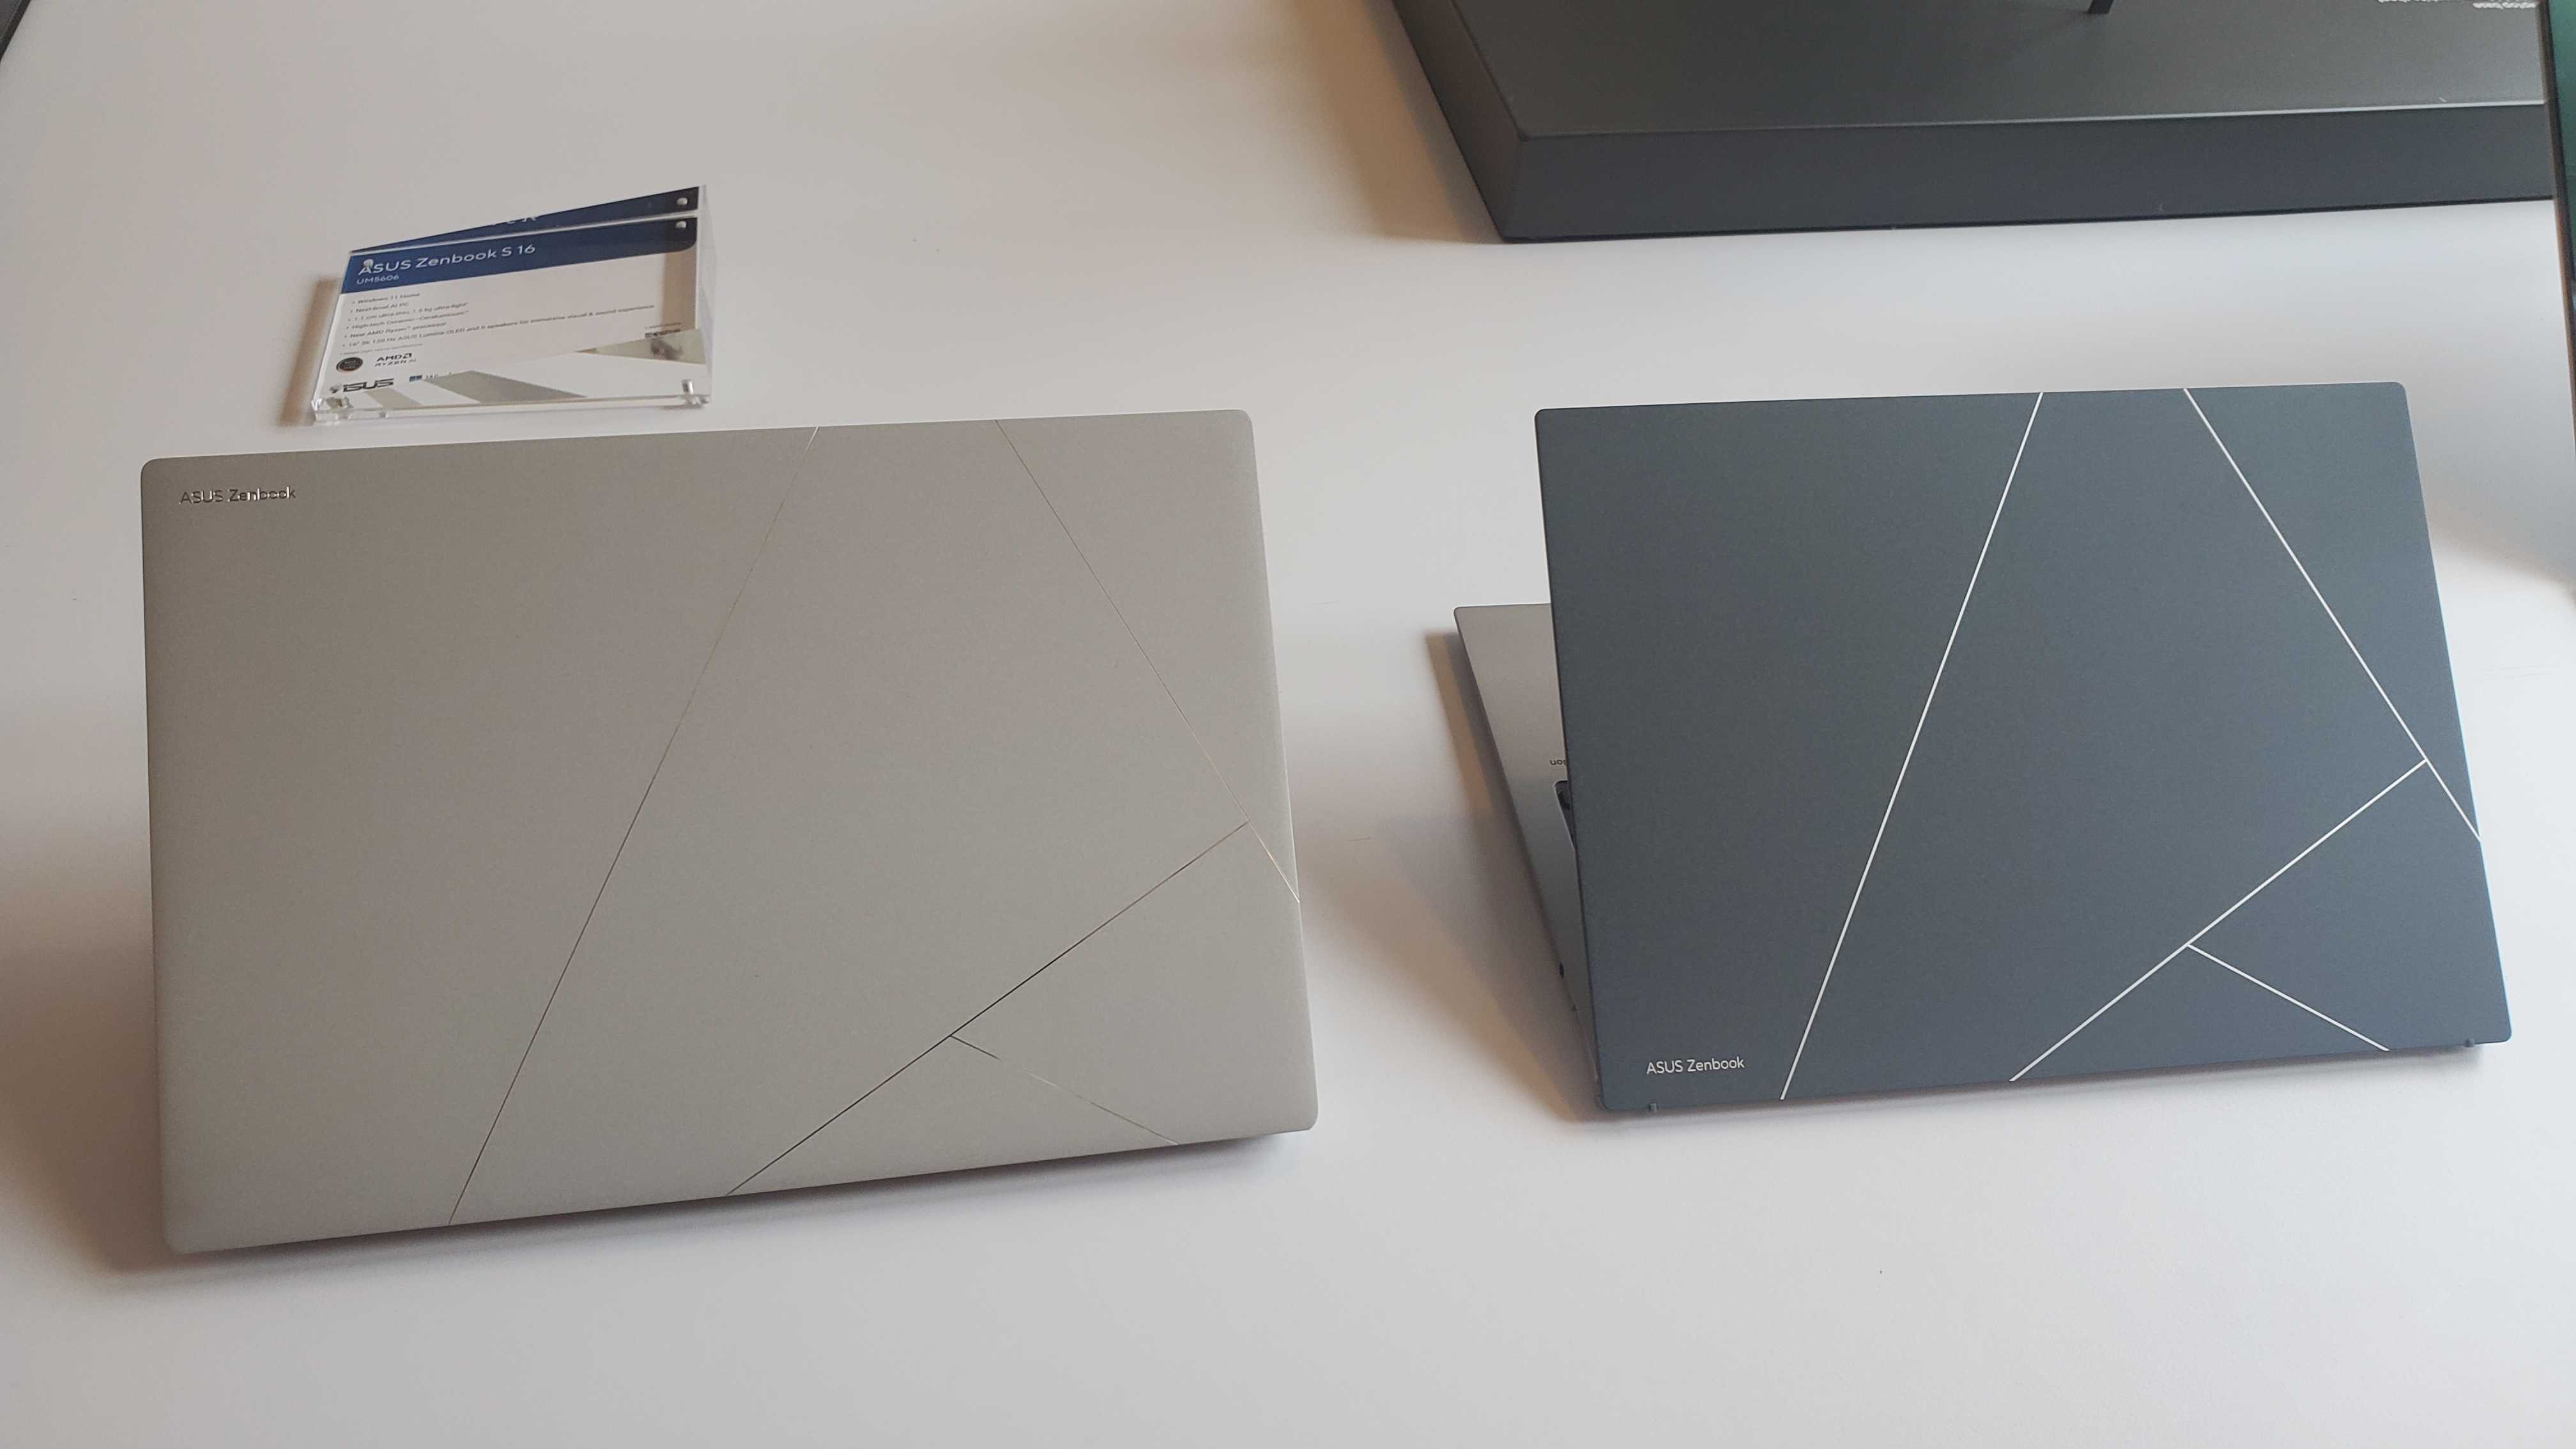 light silver and grey laptops on table